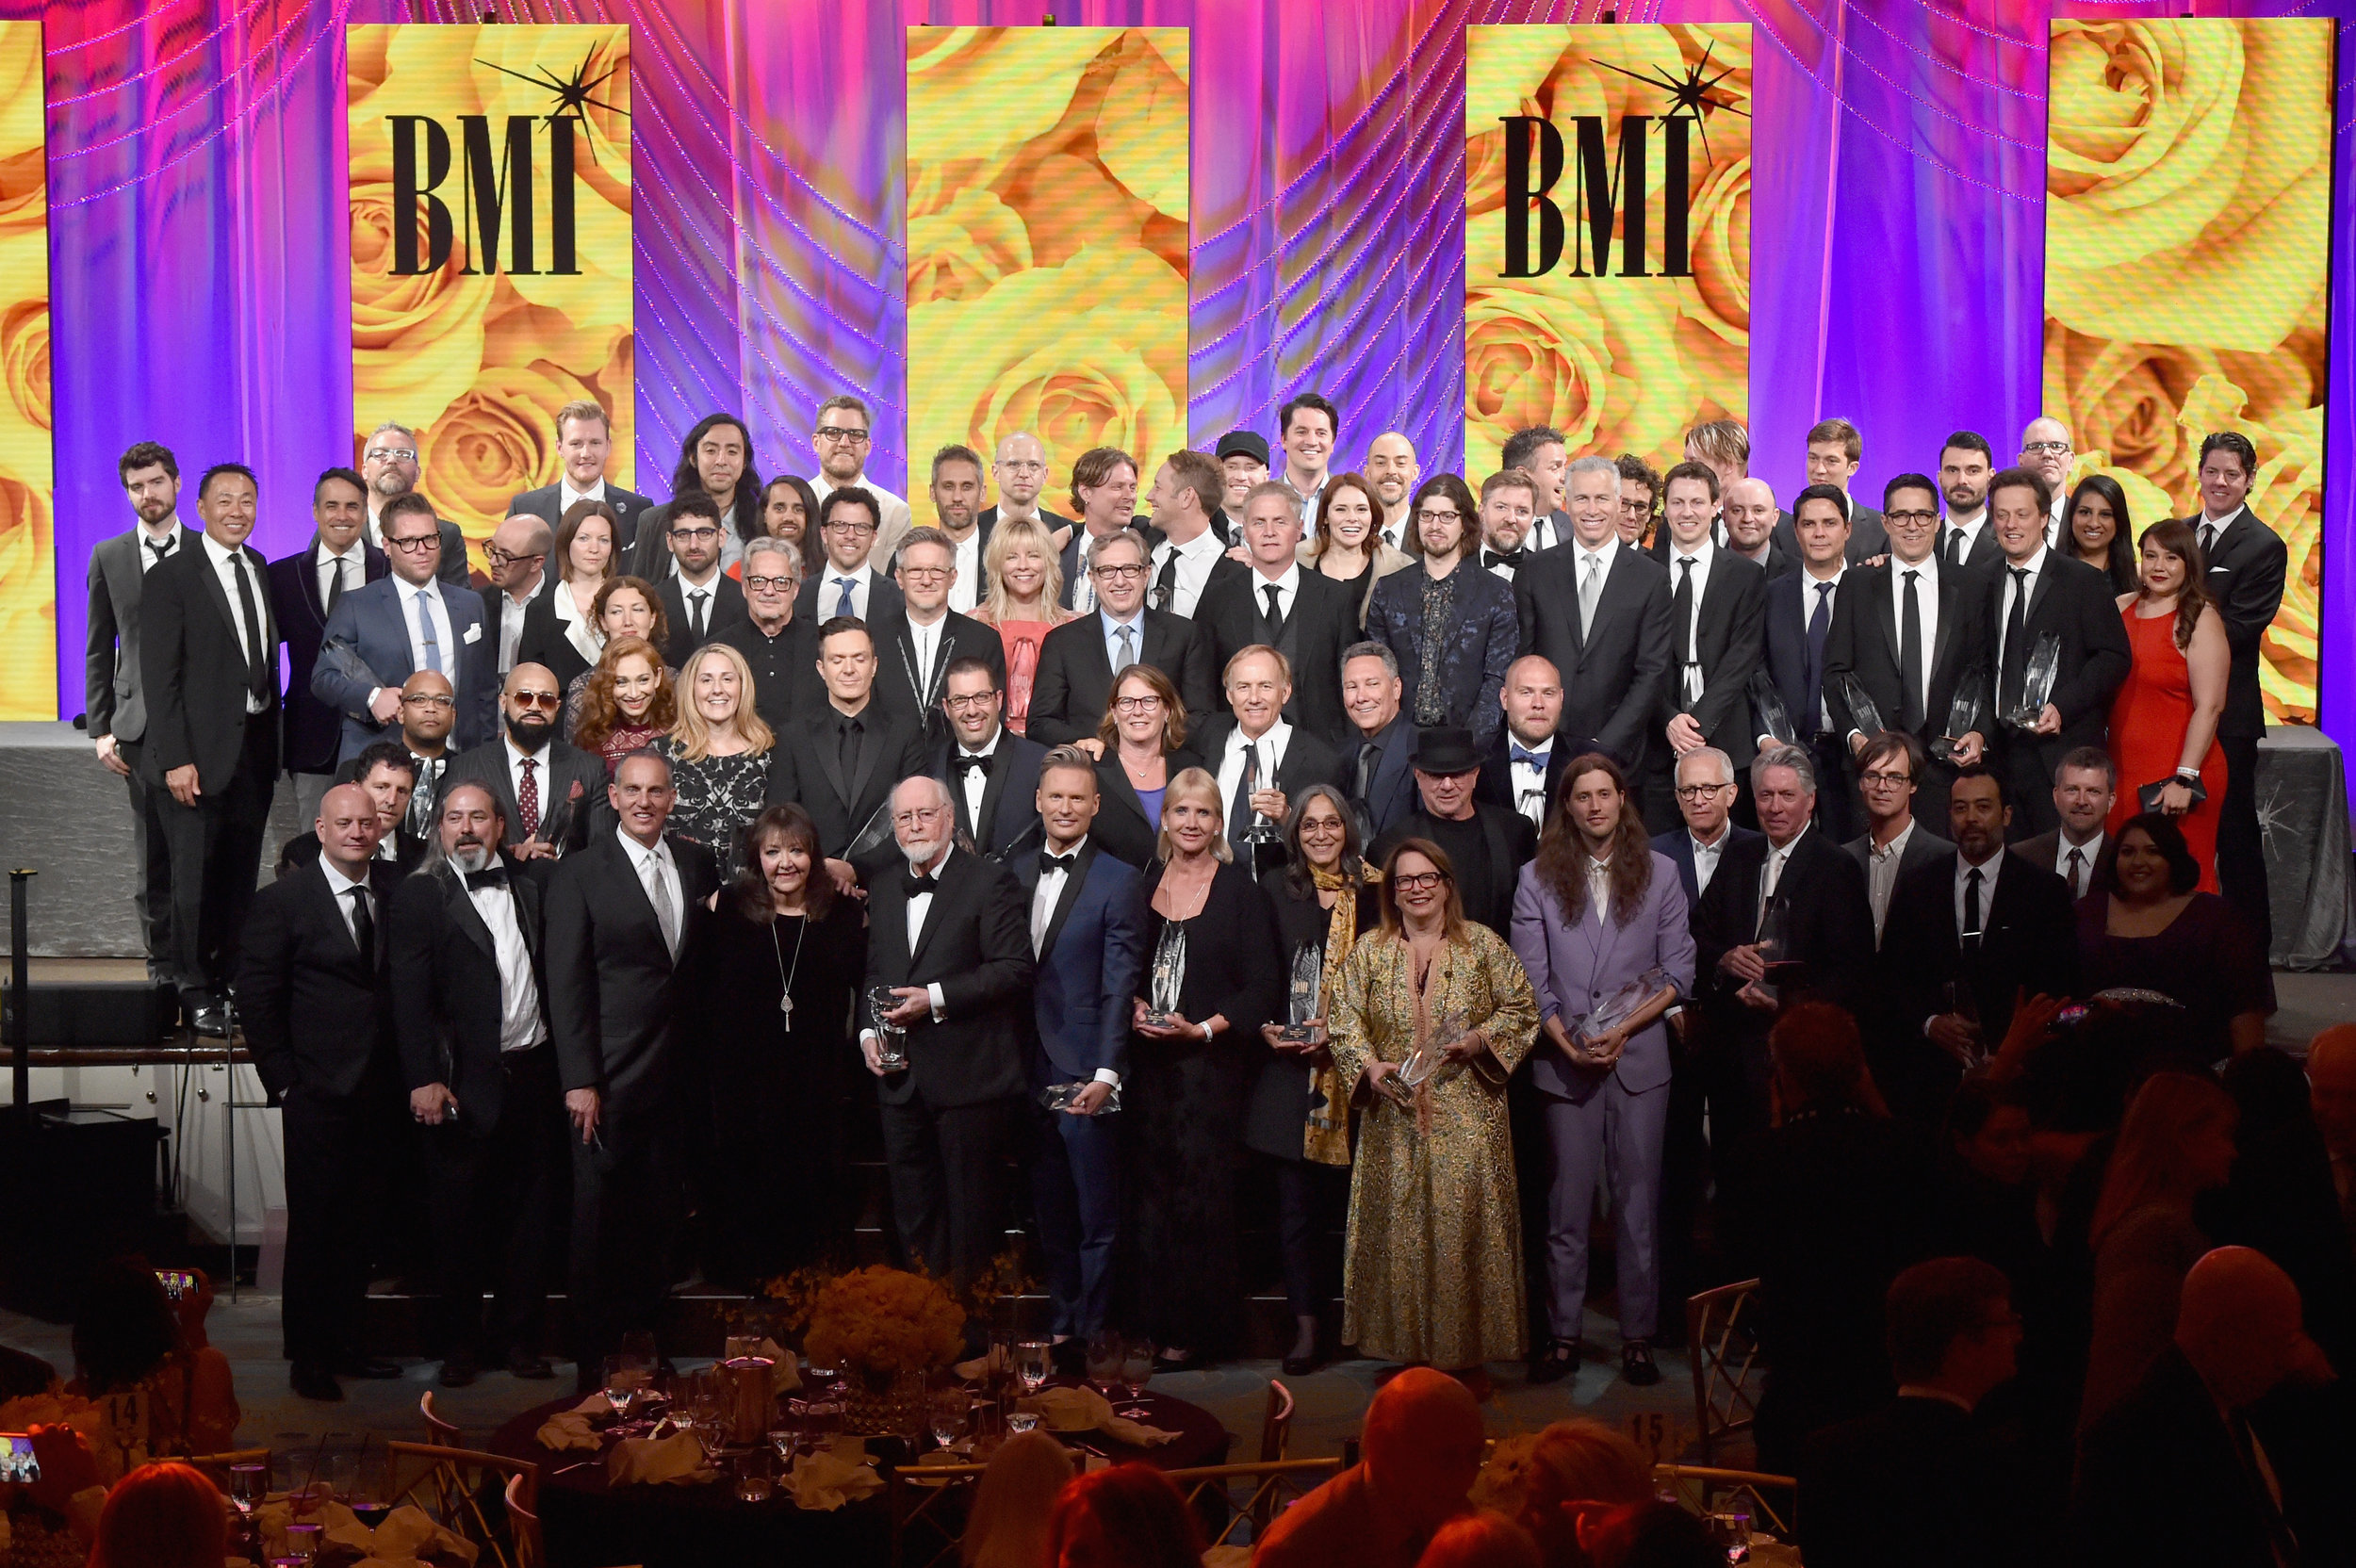  BEVERLY HILLS, CA - MAY 09:  Honorees pose with awards onstage during 34th Annual BMI Film, TV & Visual Media Awards at Regent Beverly Wilshire Hotel on May 9, 2018 in Beverly Hills, California.  (Photo by Lester Cohen/Getty Images for BMI) 